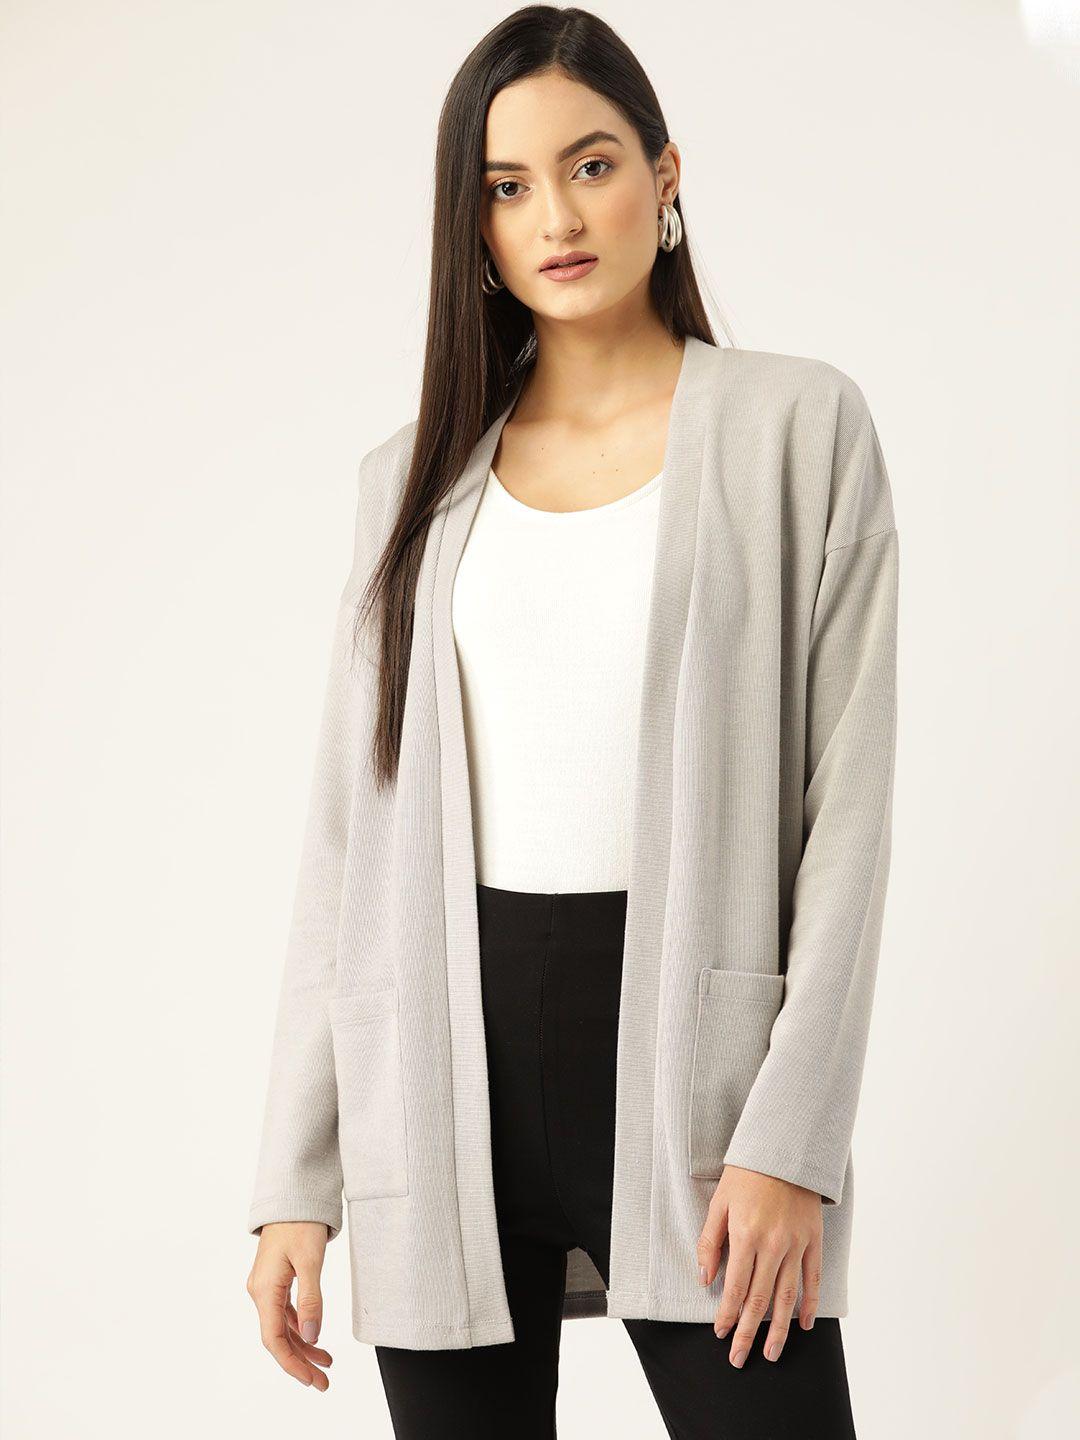 kassually women grey solid open front shrug